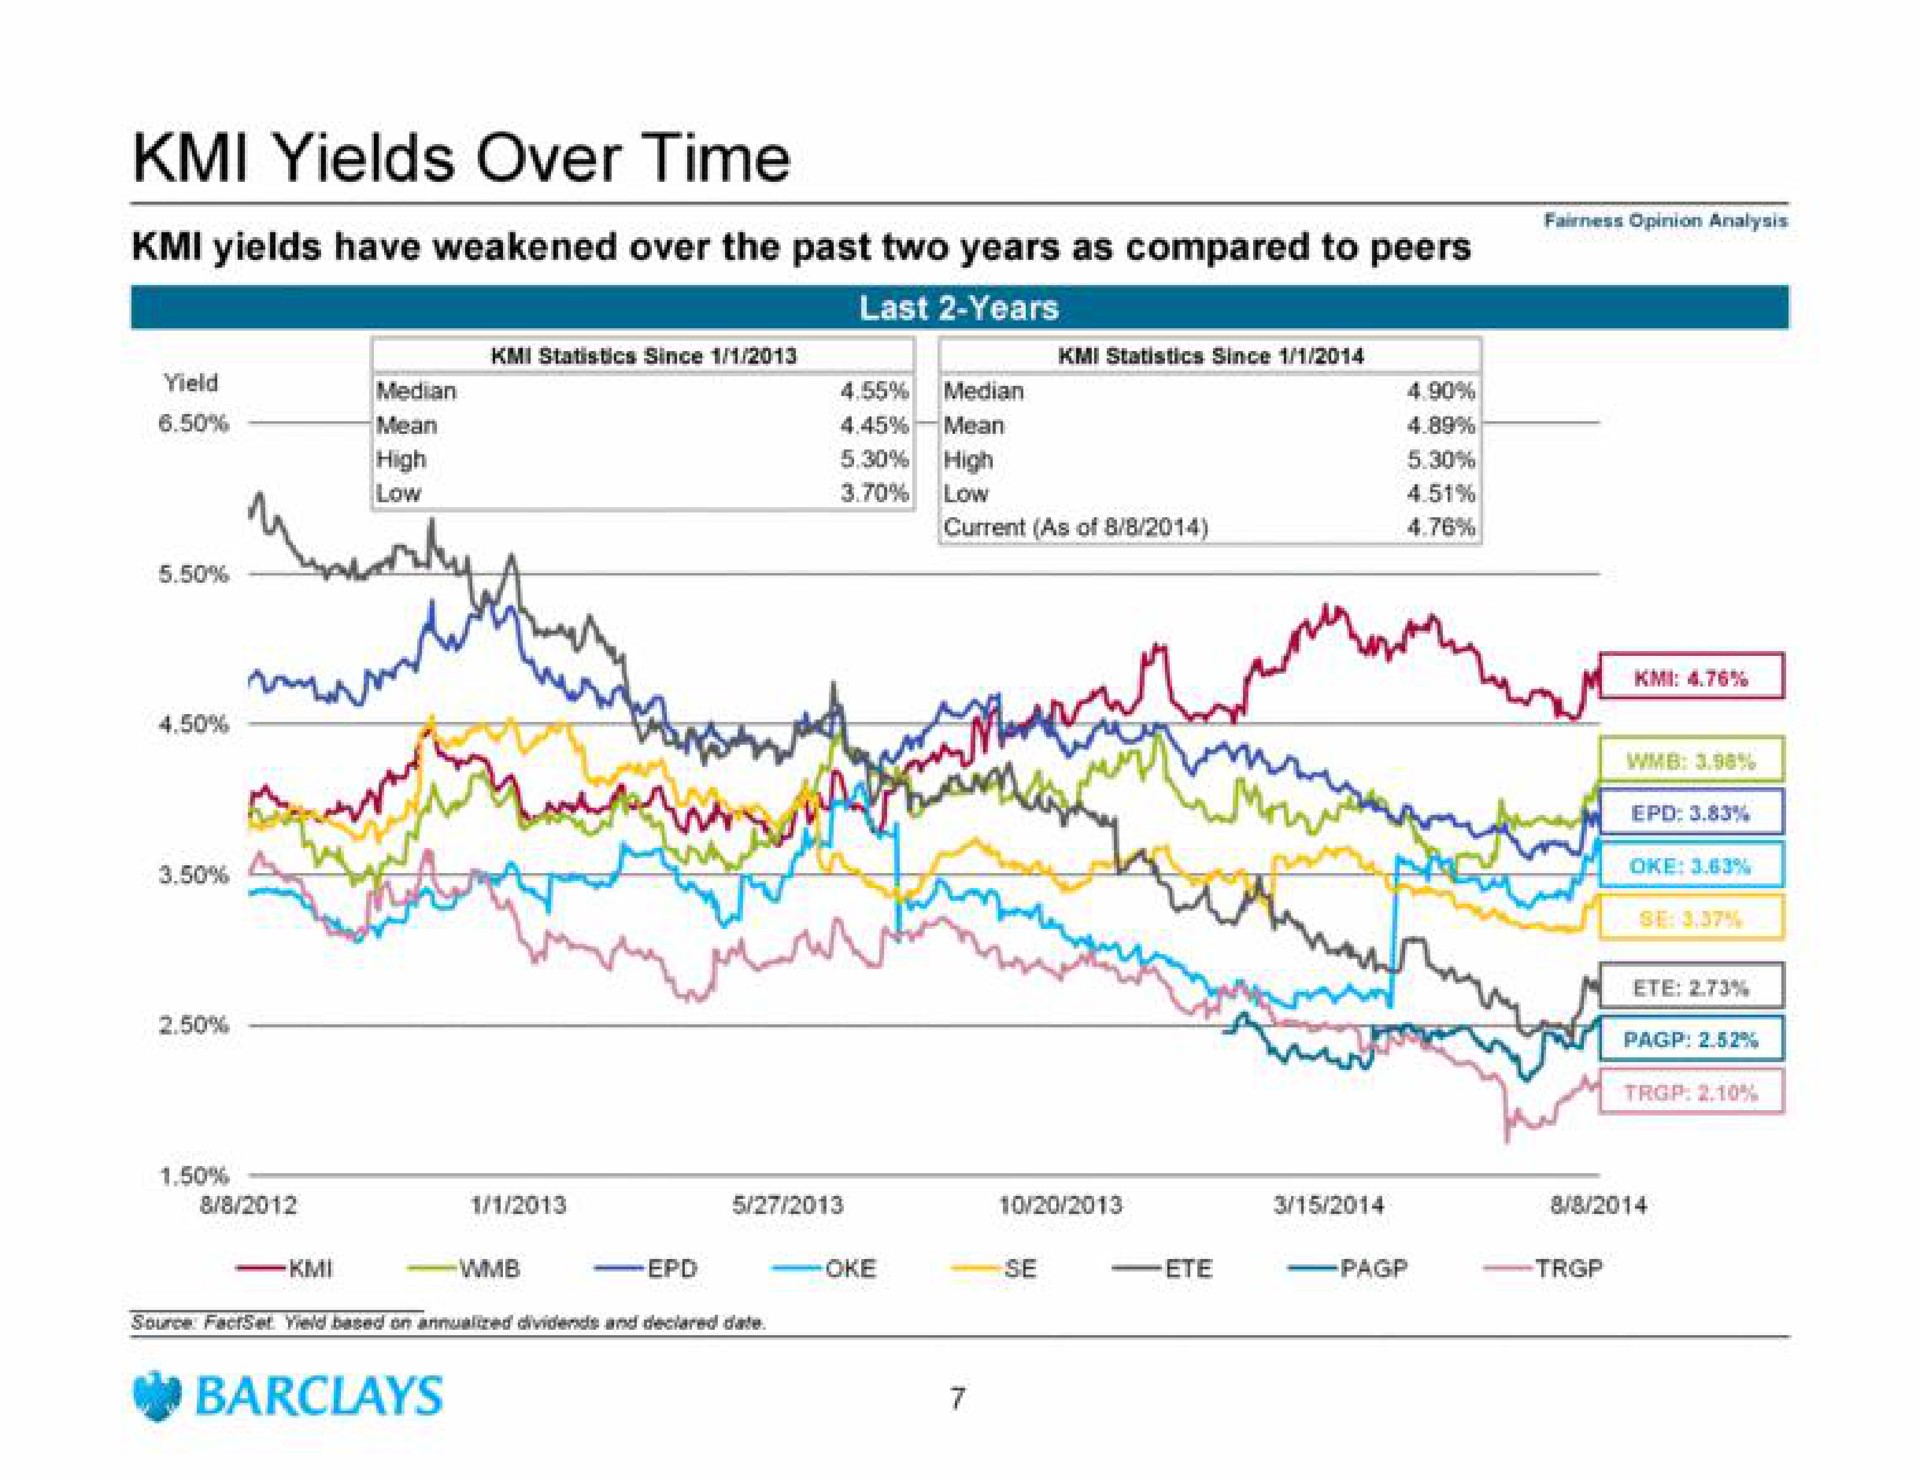 yields over time yields have weakened over the past two years as compared to peers tan pace | Barclays